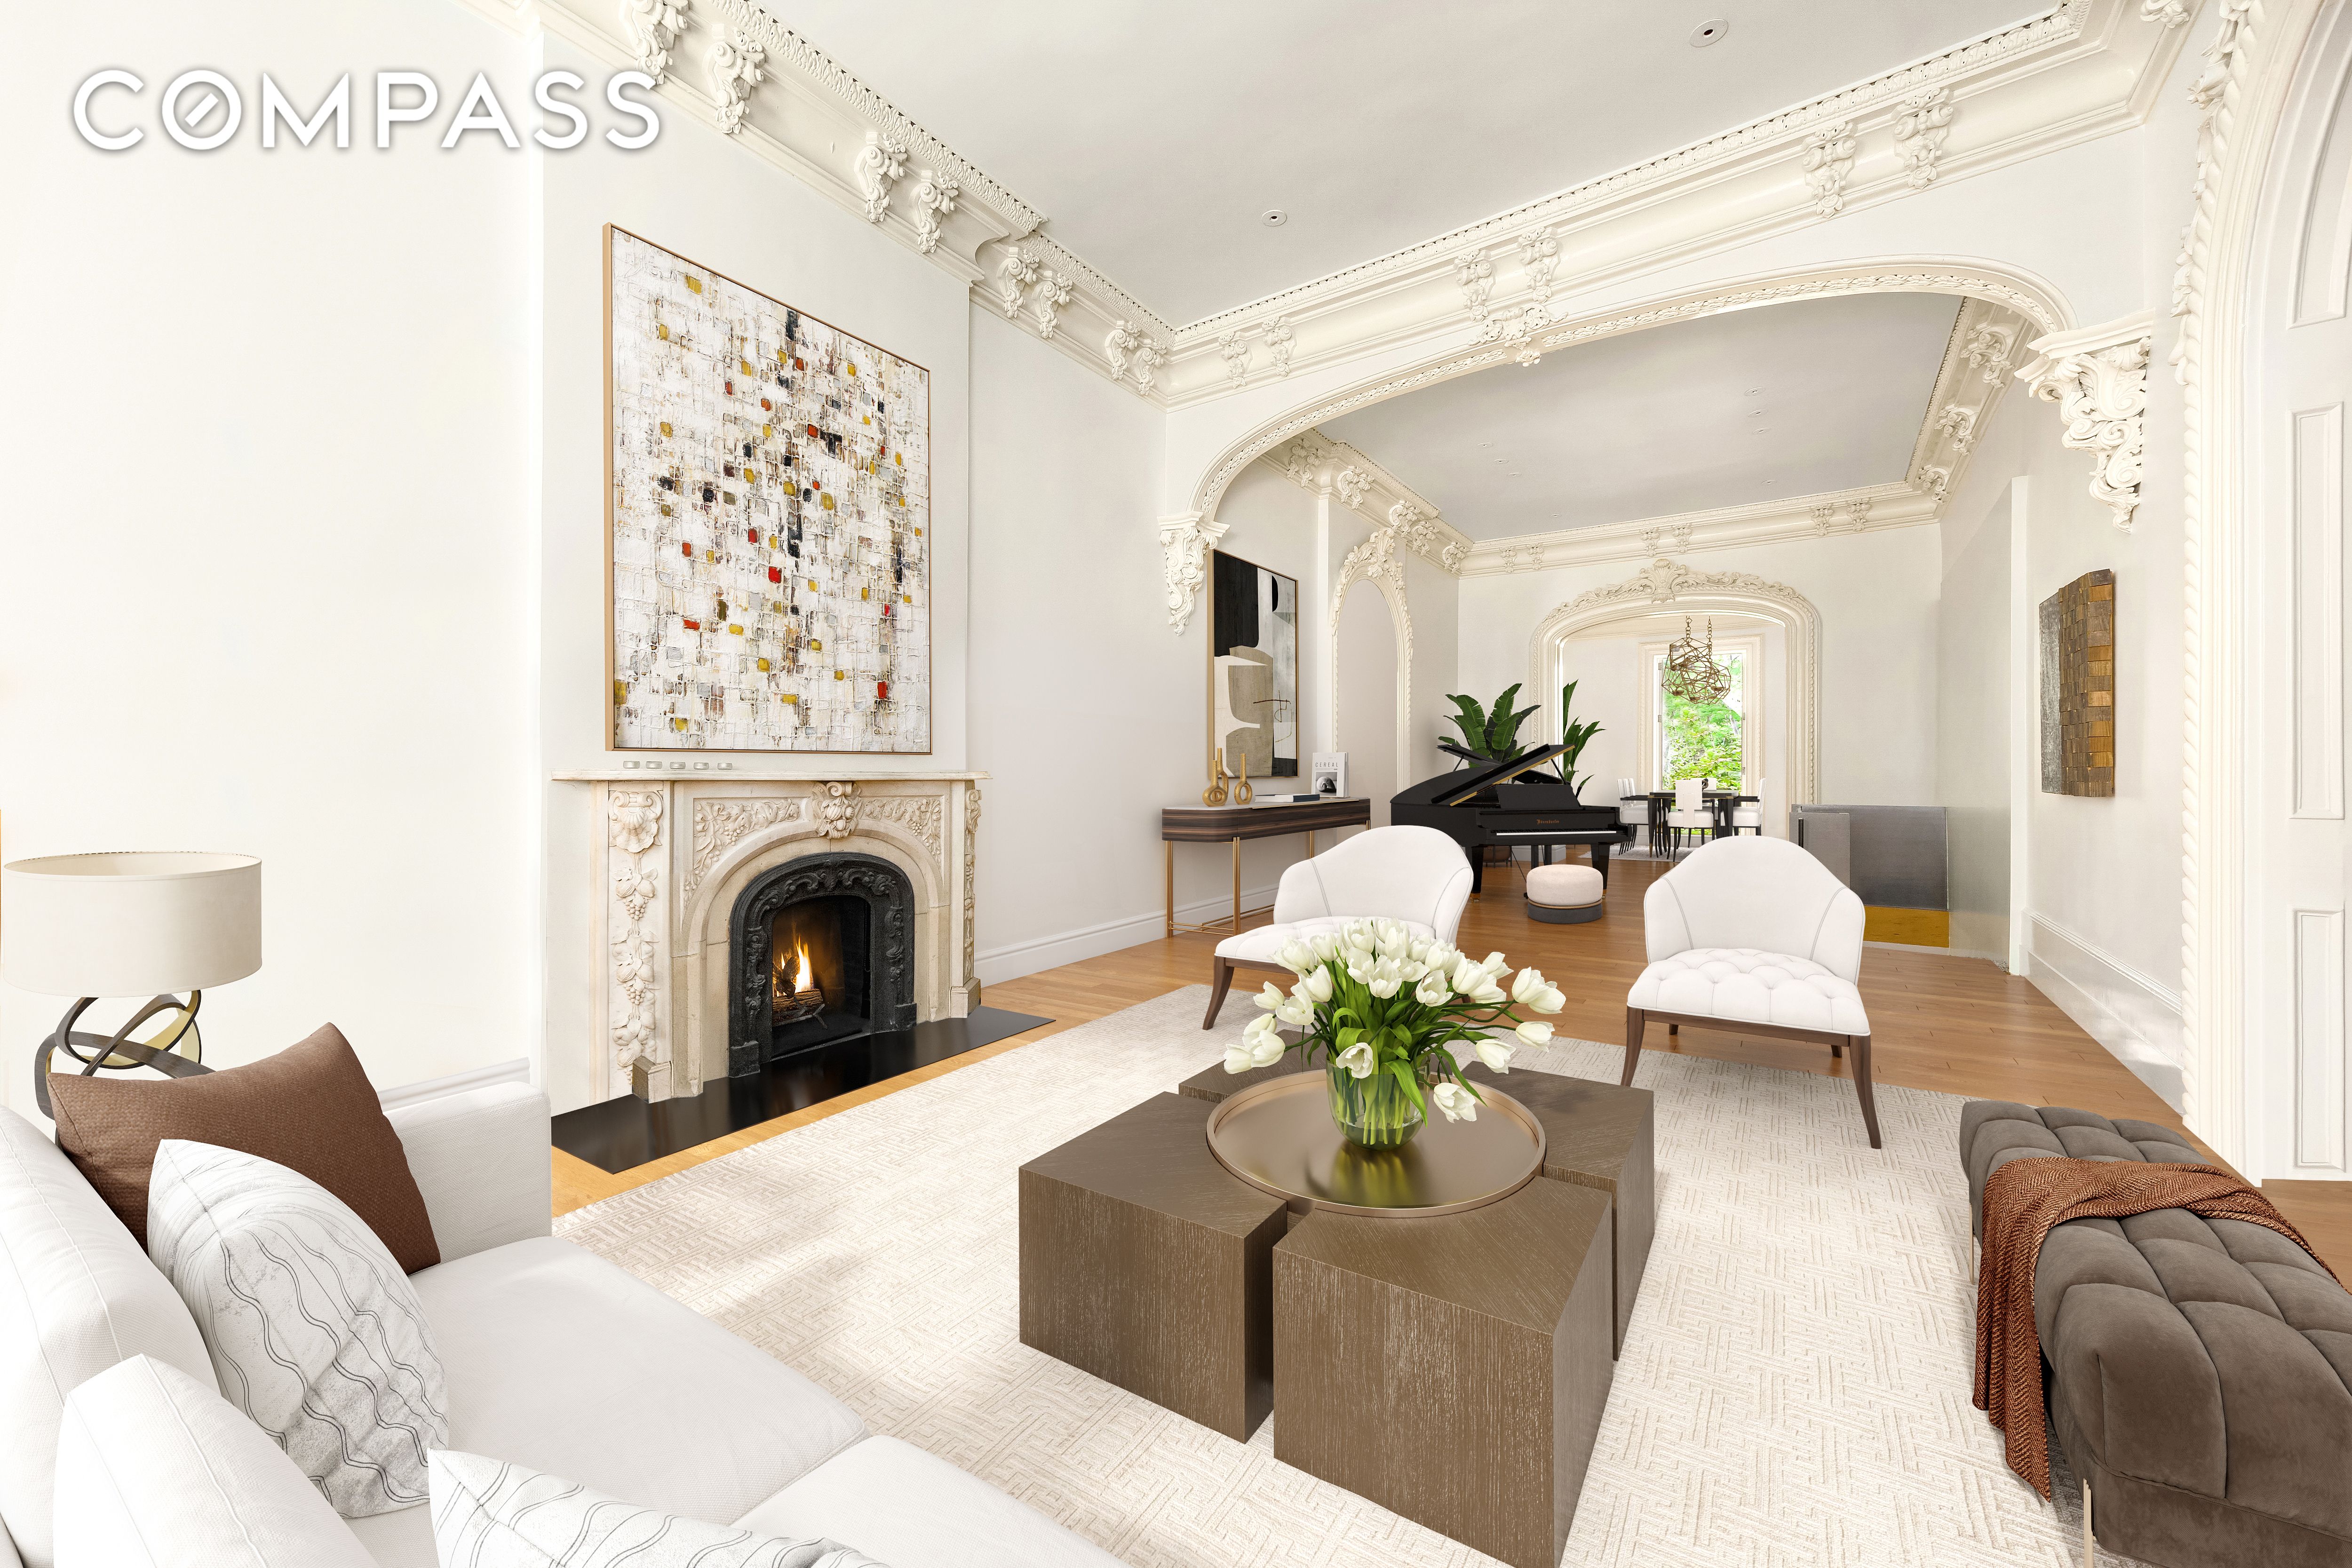 120 East 19th Street, Gramercy Park, Downtown, NYC - 10 Bedrooms  
9.5 Bathrooms  
26 Rooms - 